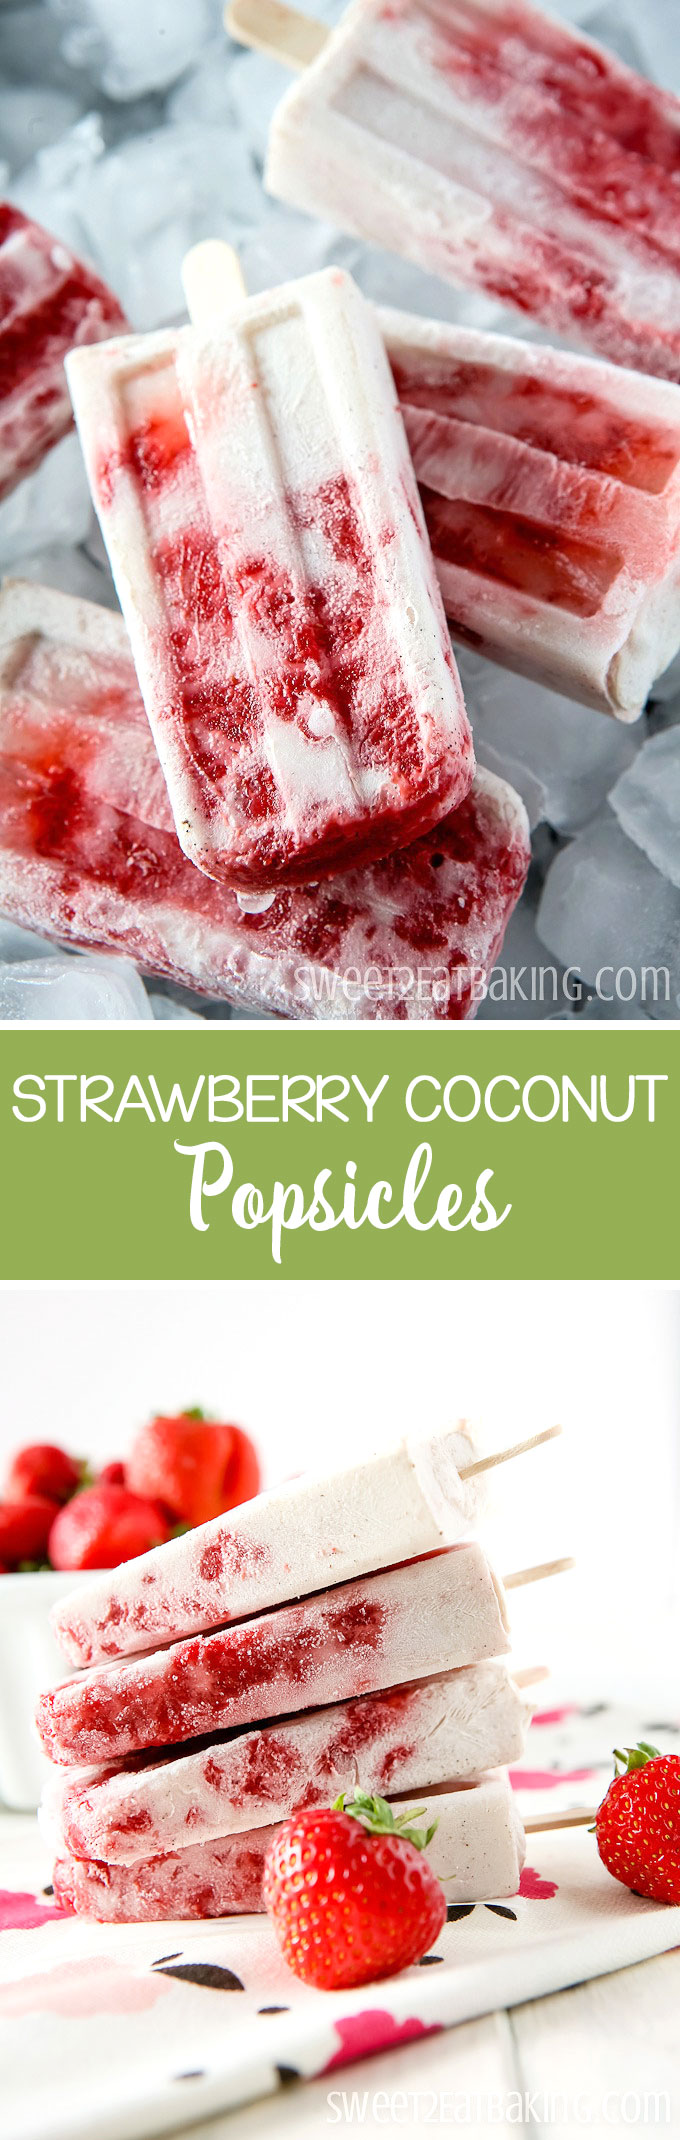 Natural Strawberry Coconut Popsicles Recipe by Sweet2EatBaking.com | Made using all natural ingredients- no refined sugar! Using strawberries, coconut milk, honey, and vanilla bean paste. A delicious way to beat the heat this summer!